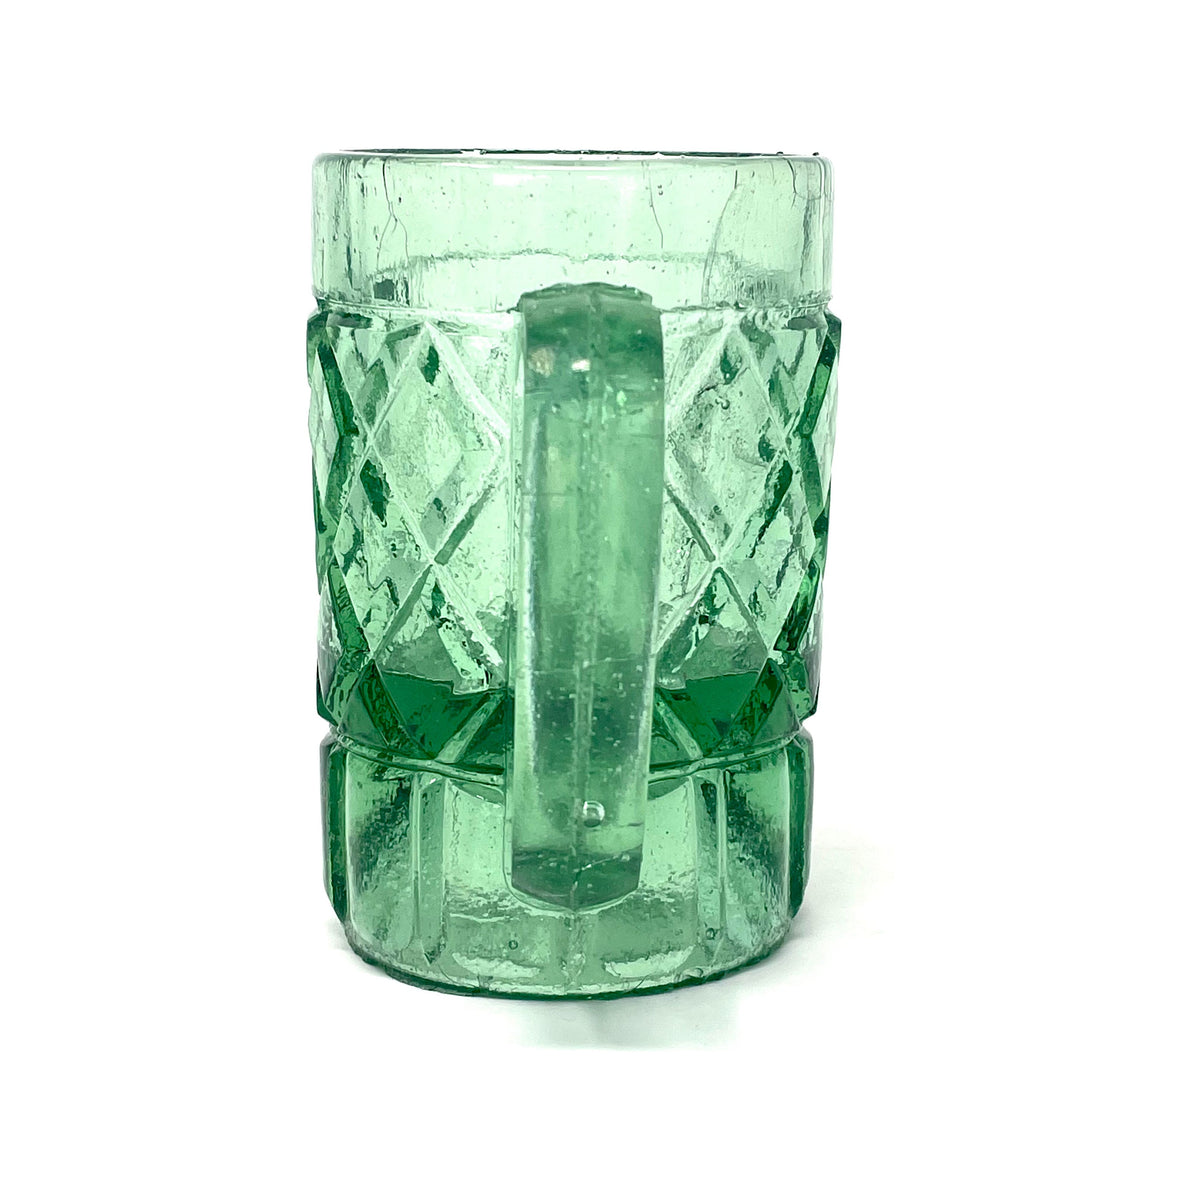 Green Rimmed Mexican Beer Mugs